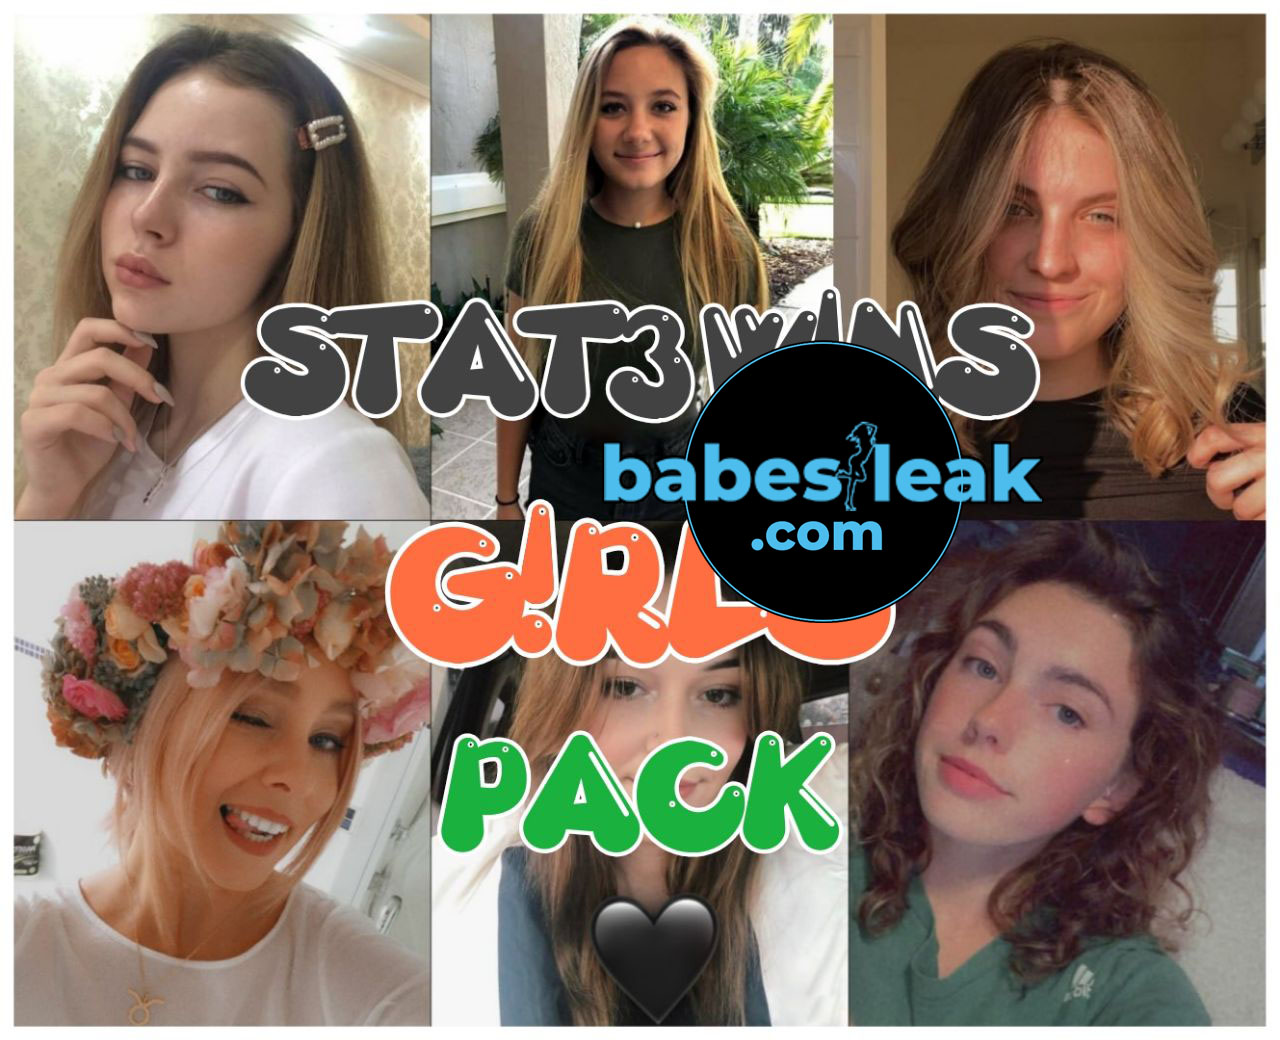 Premium 10 Statewins Girls Pack Stw073 Onlyfans Leaks Snapchat